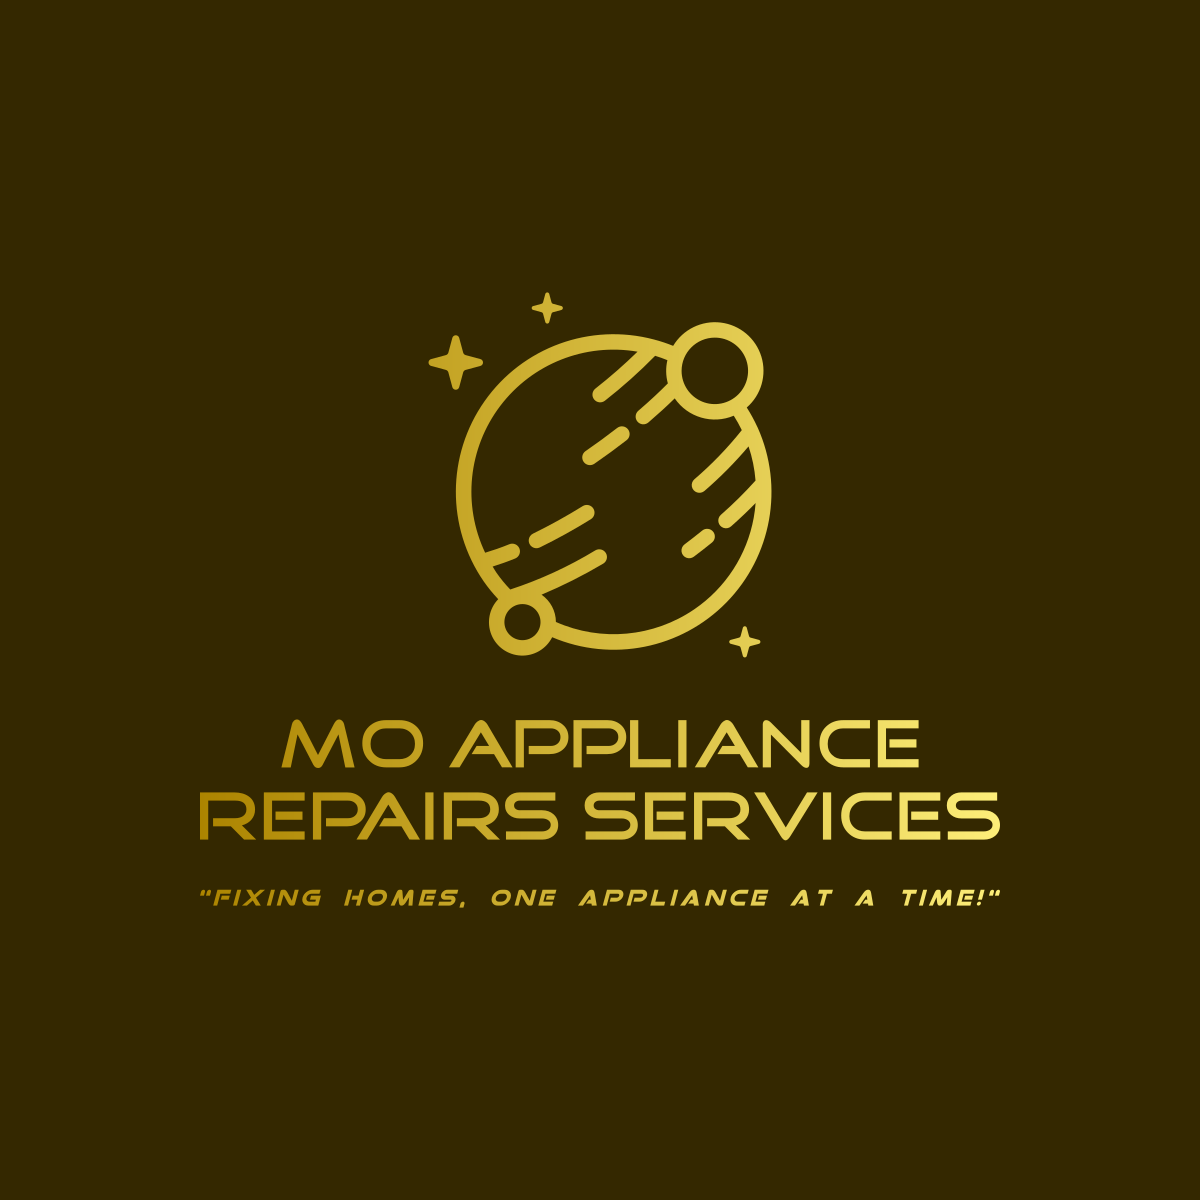 Mo Appliance Repairs Services Logo